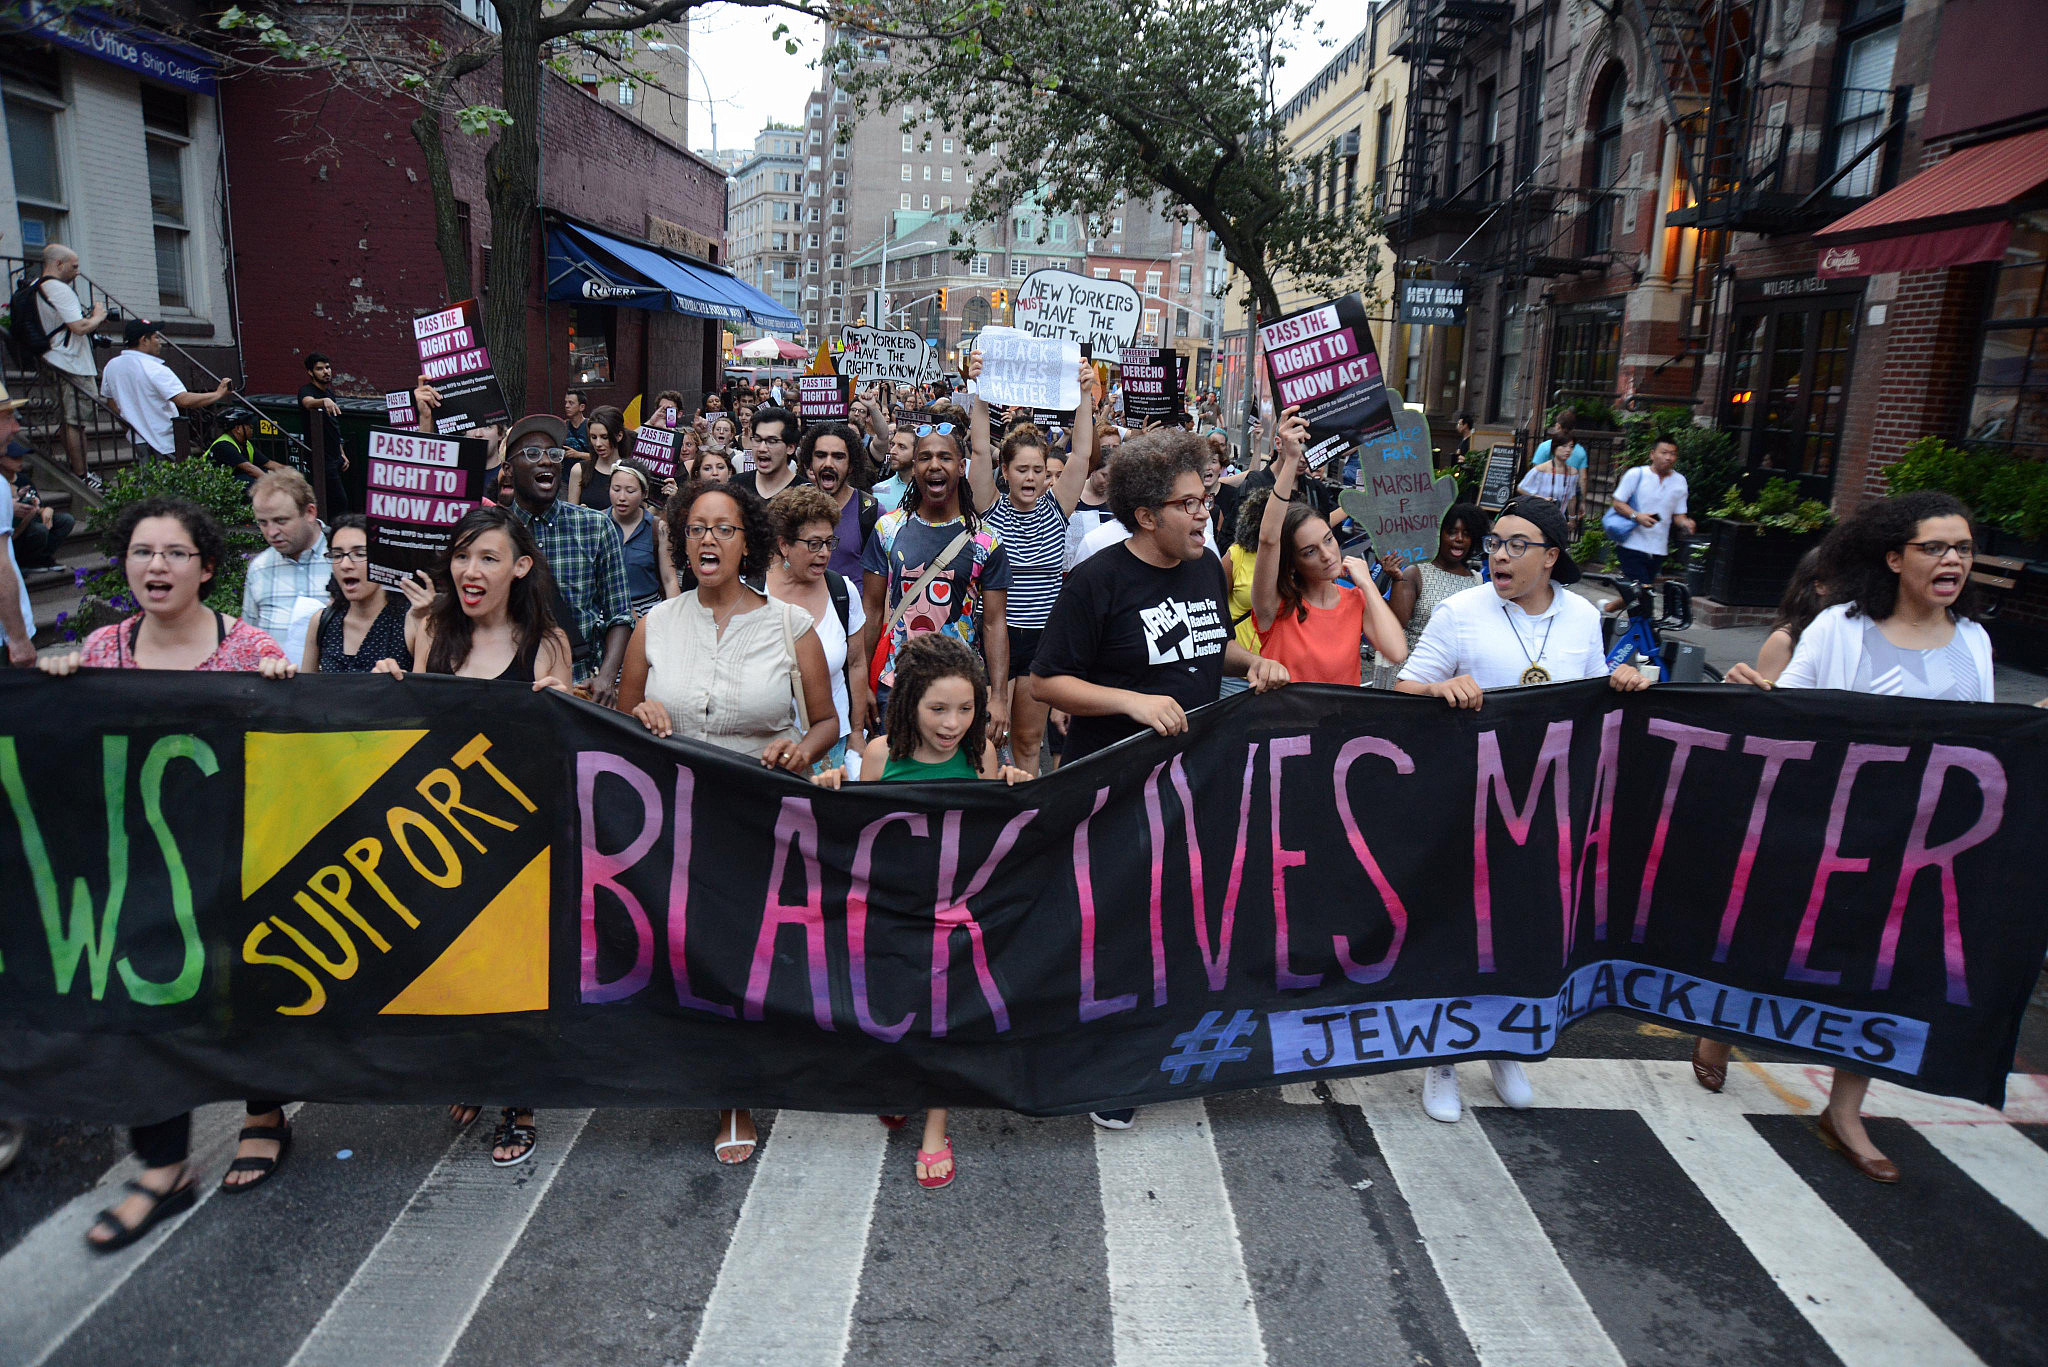 Hundreds of Jews take part in a protest in support of Black Lives Matter, New York City, August 11, 2016. (Gili Getz)